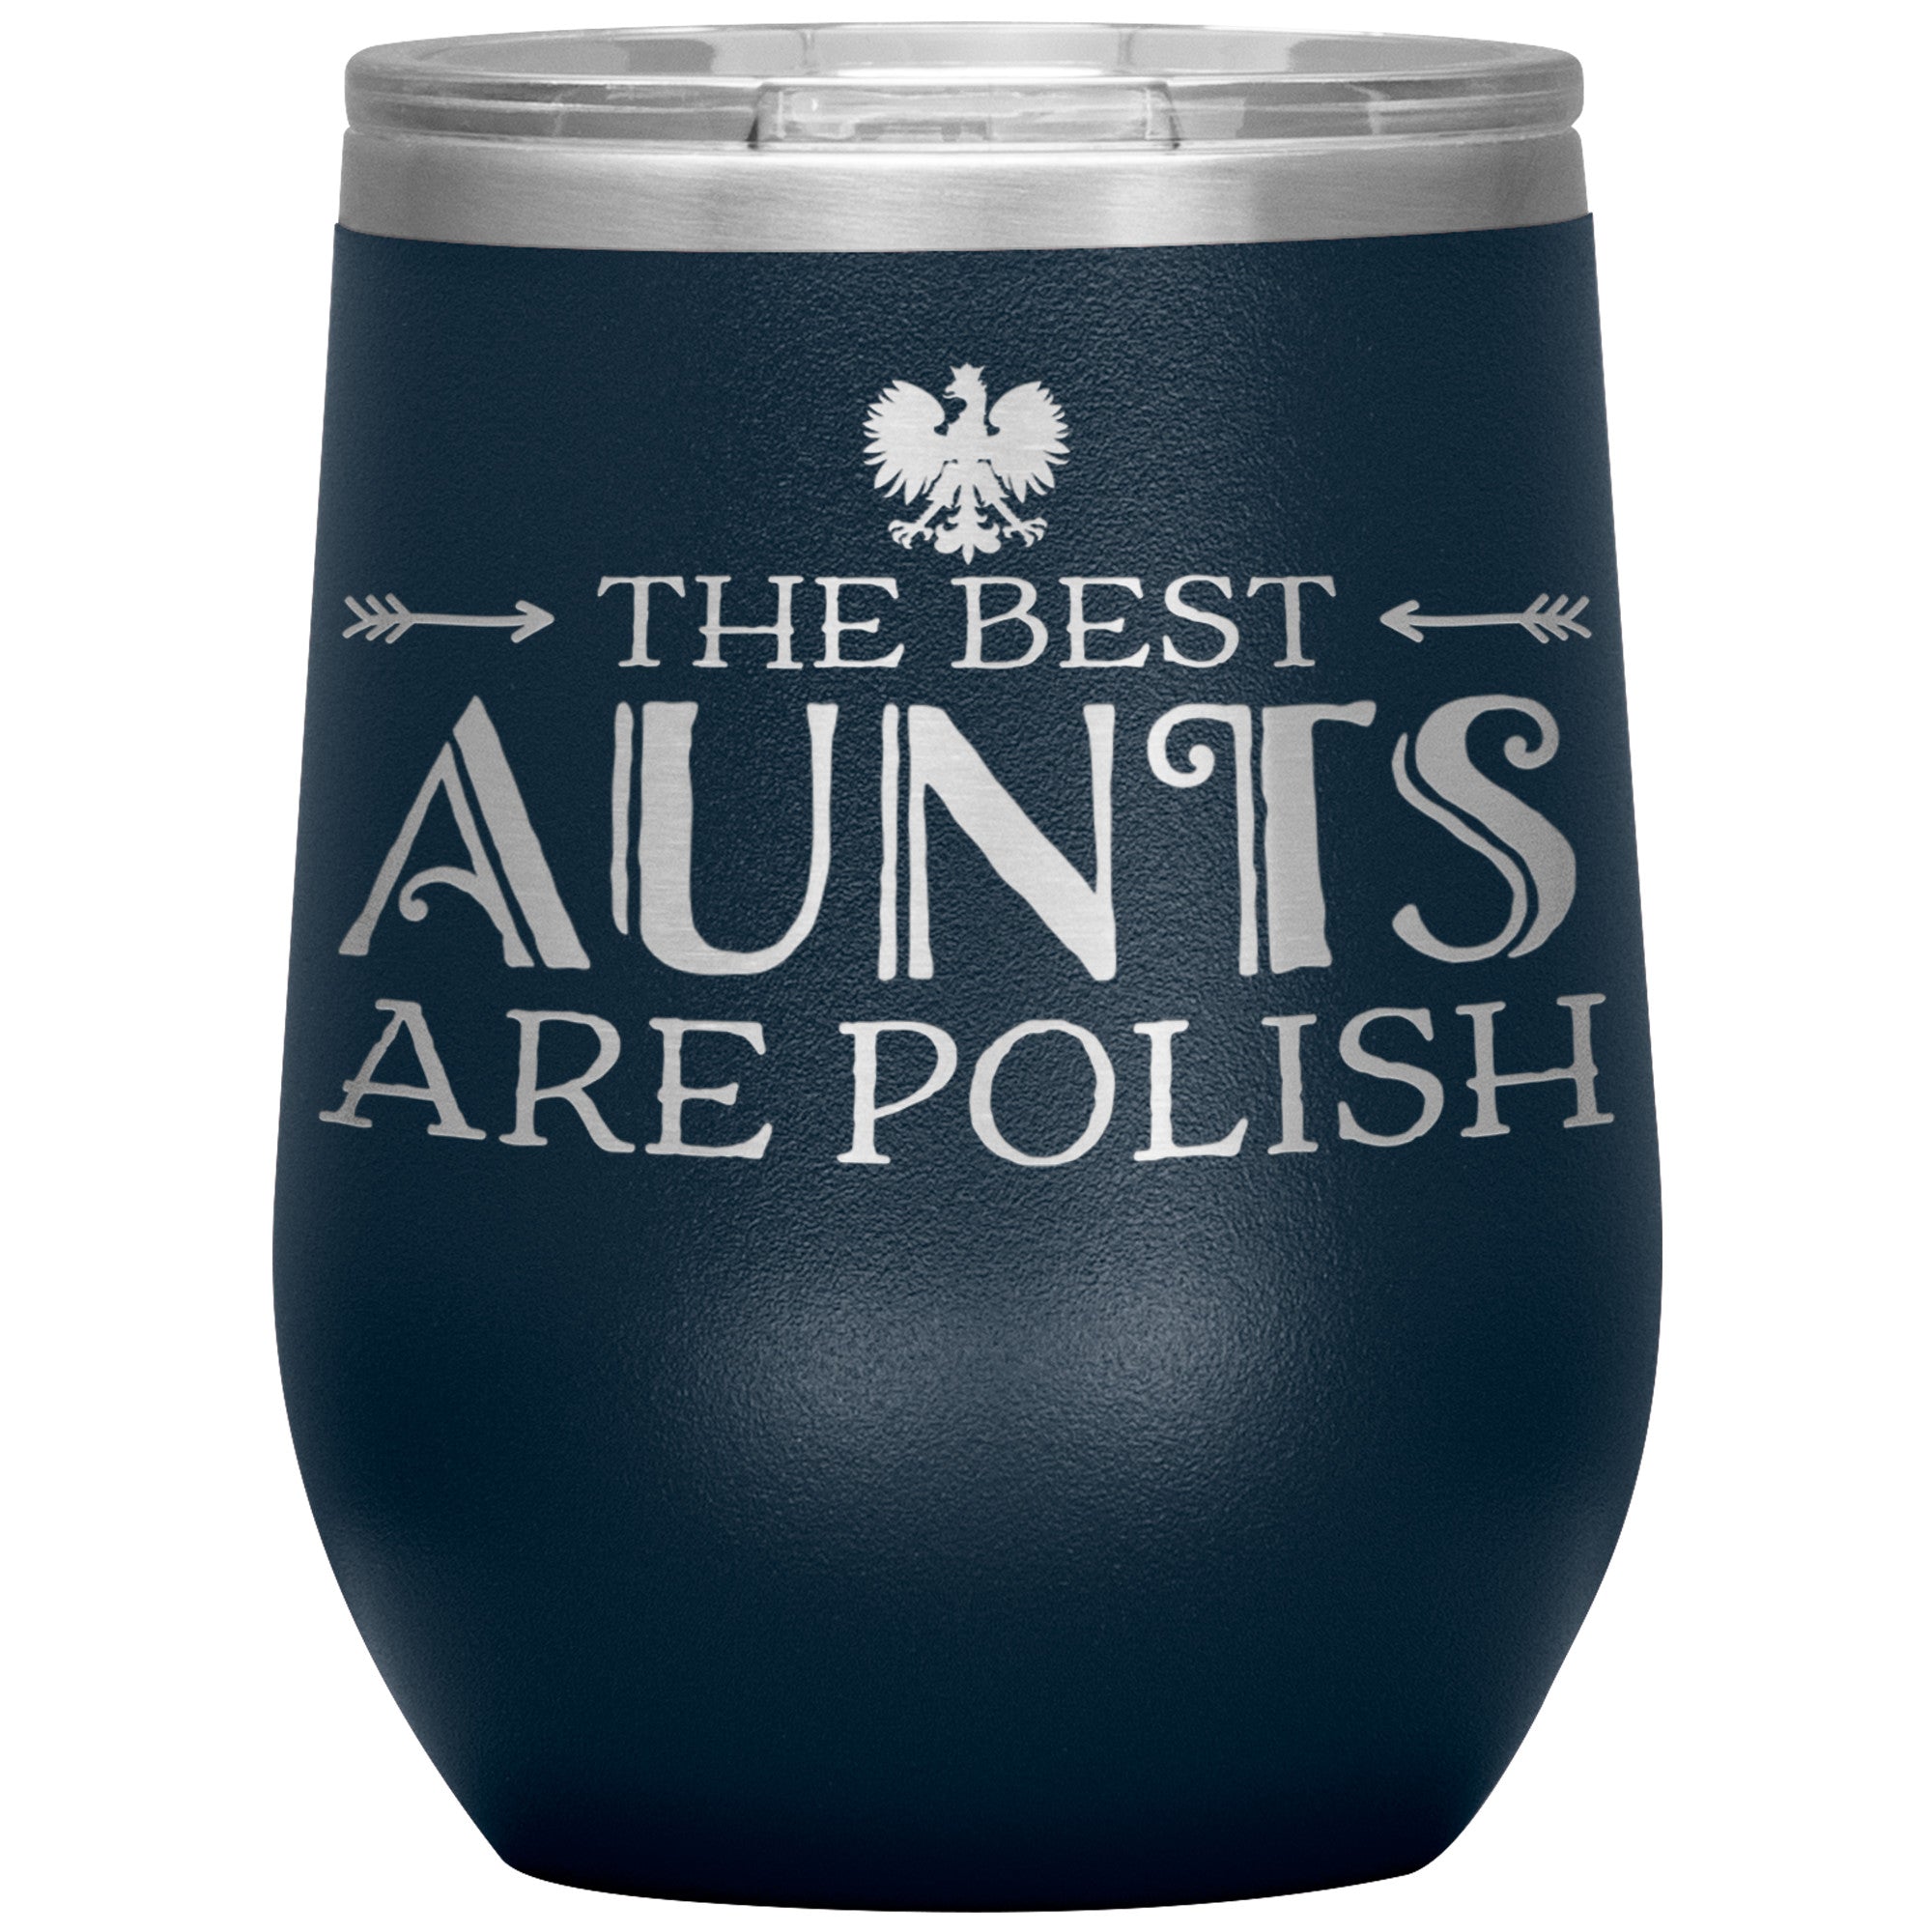 The Best Aunts Are Polish Insulated Wine Tumbler Tumblers teelaunch Navy  